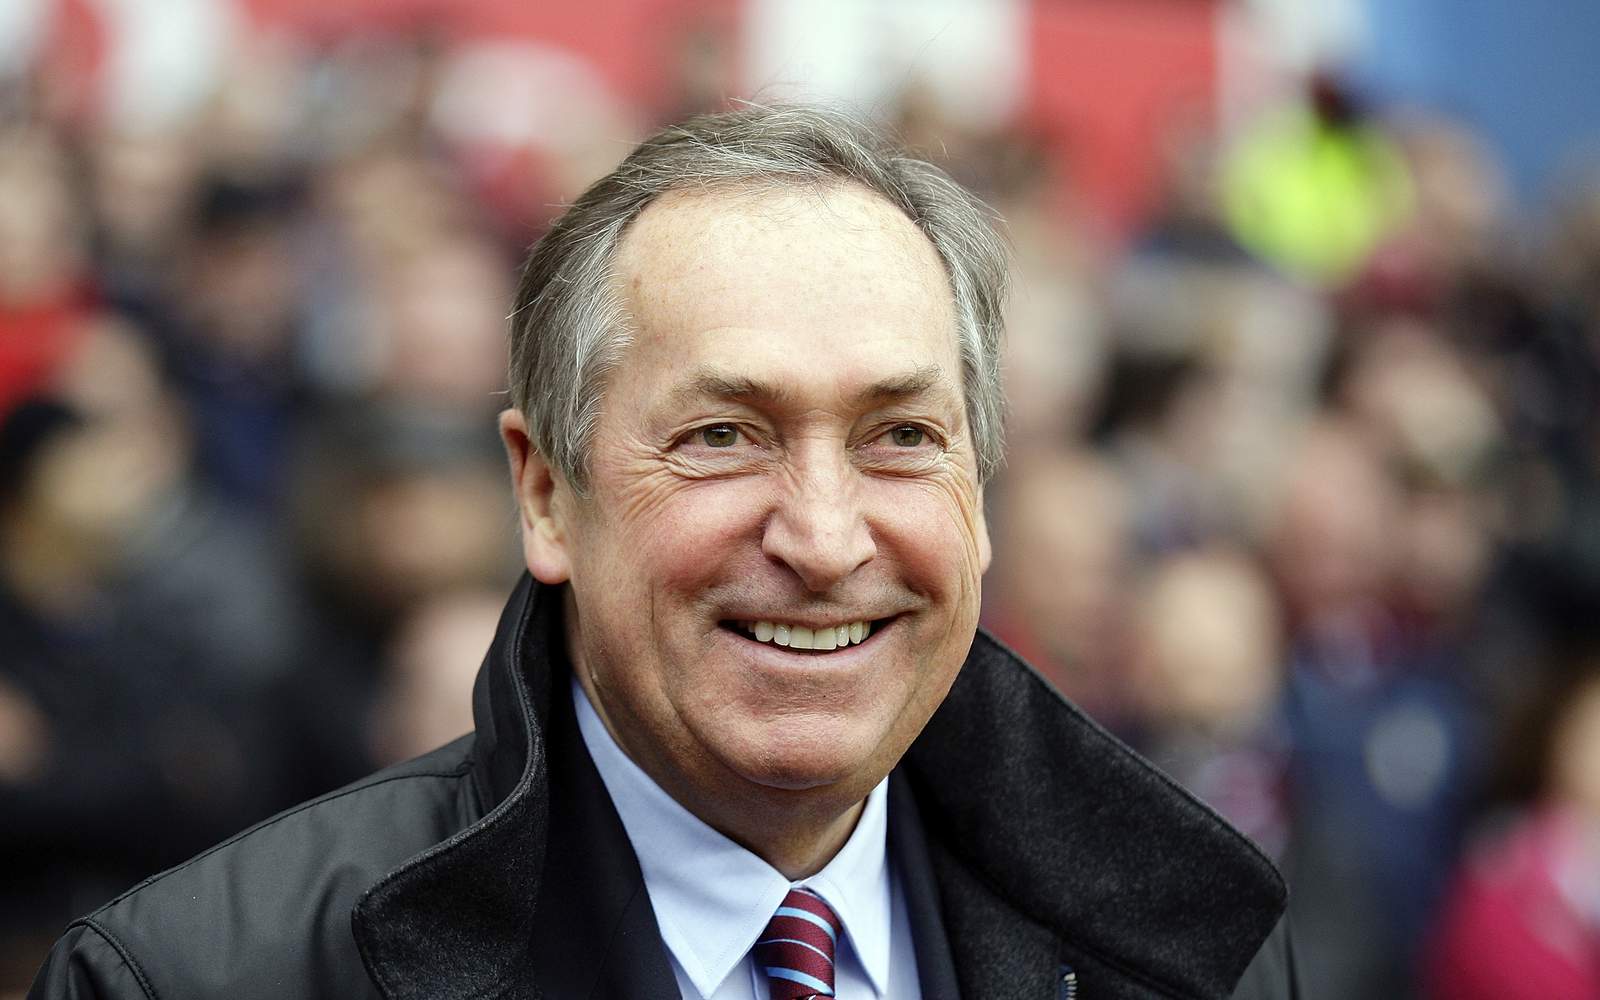 Gerard Houllier, former Liverpool coach, dies at 73